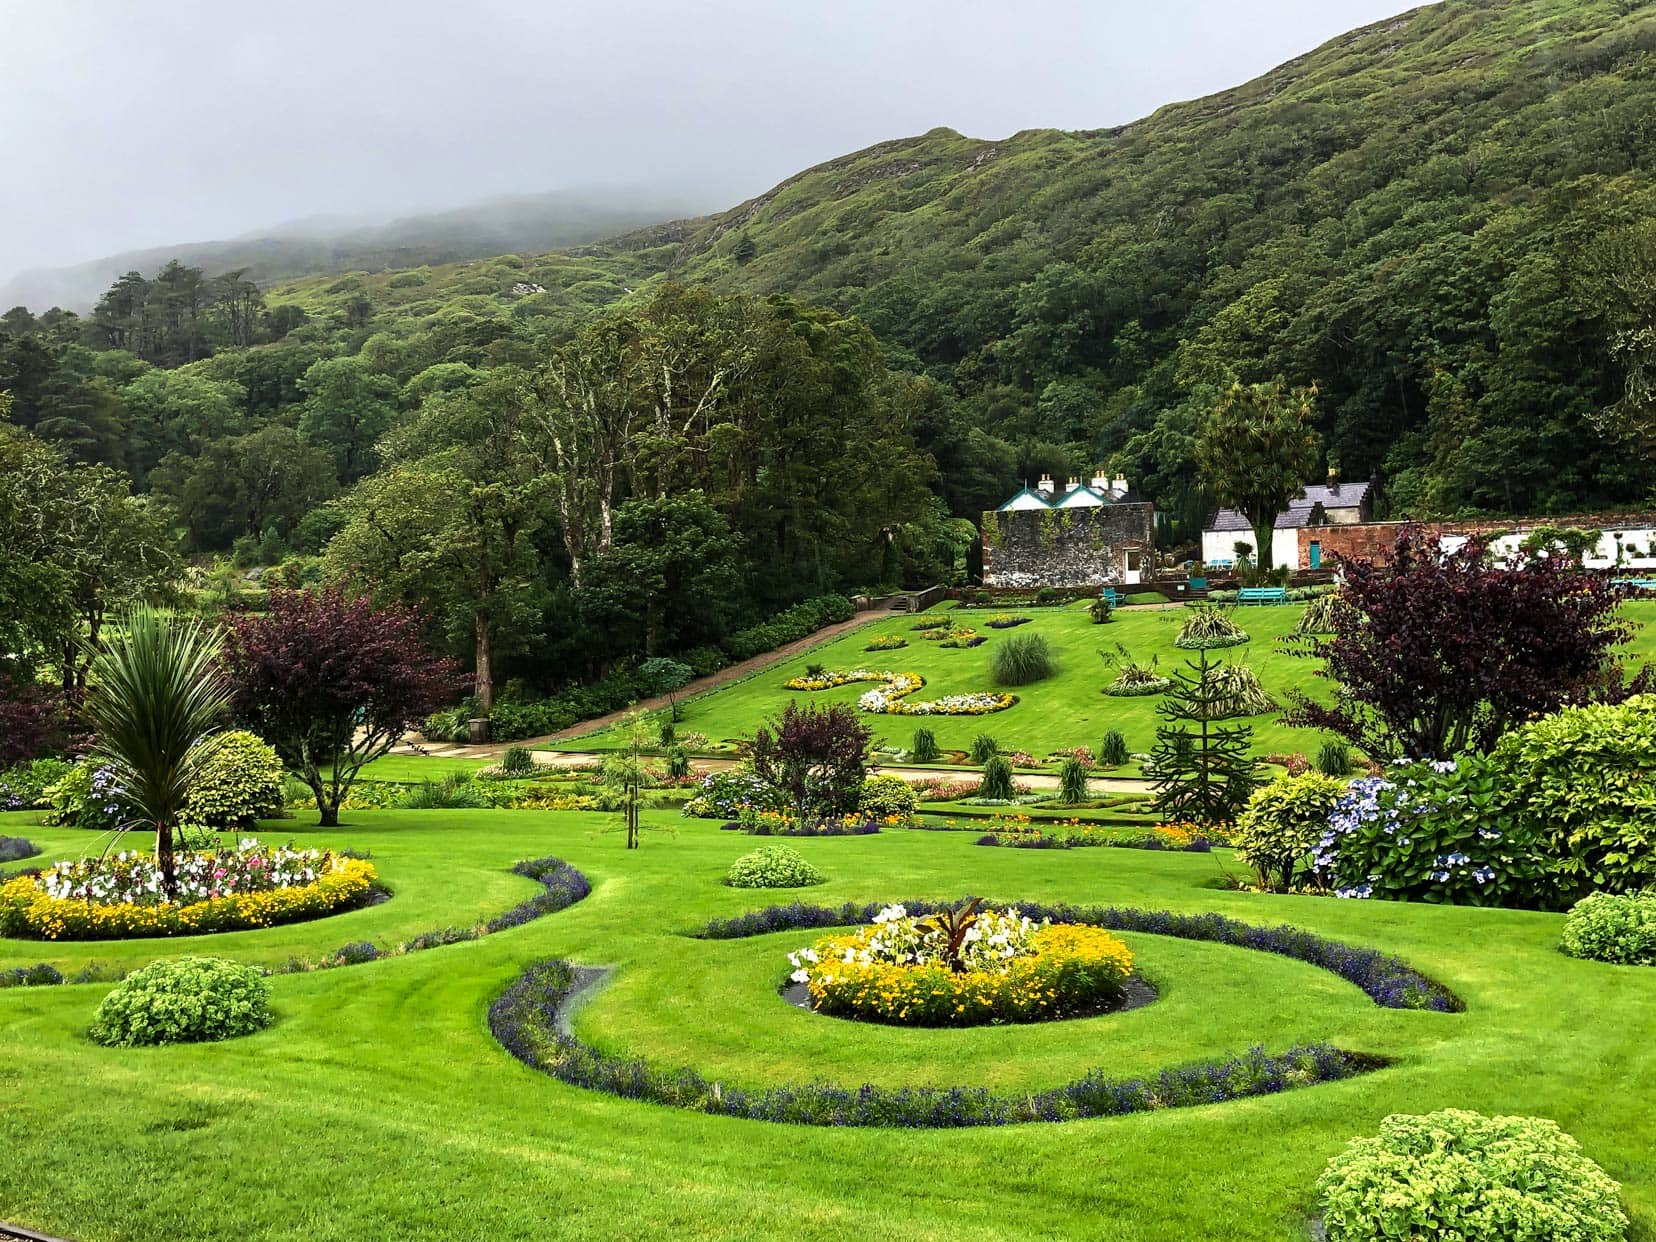 Kylemore-Abbey-walled-gardens with floral displays in circles